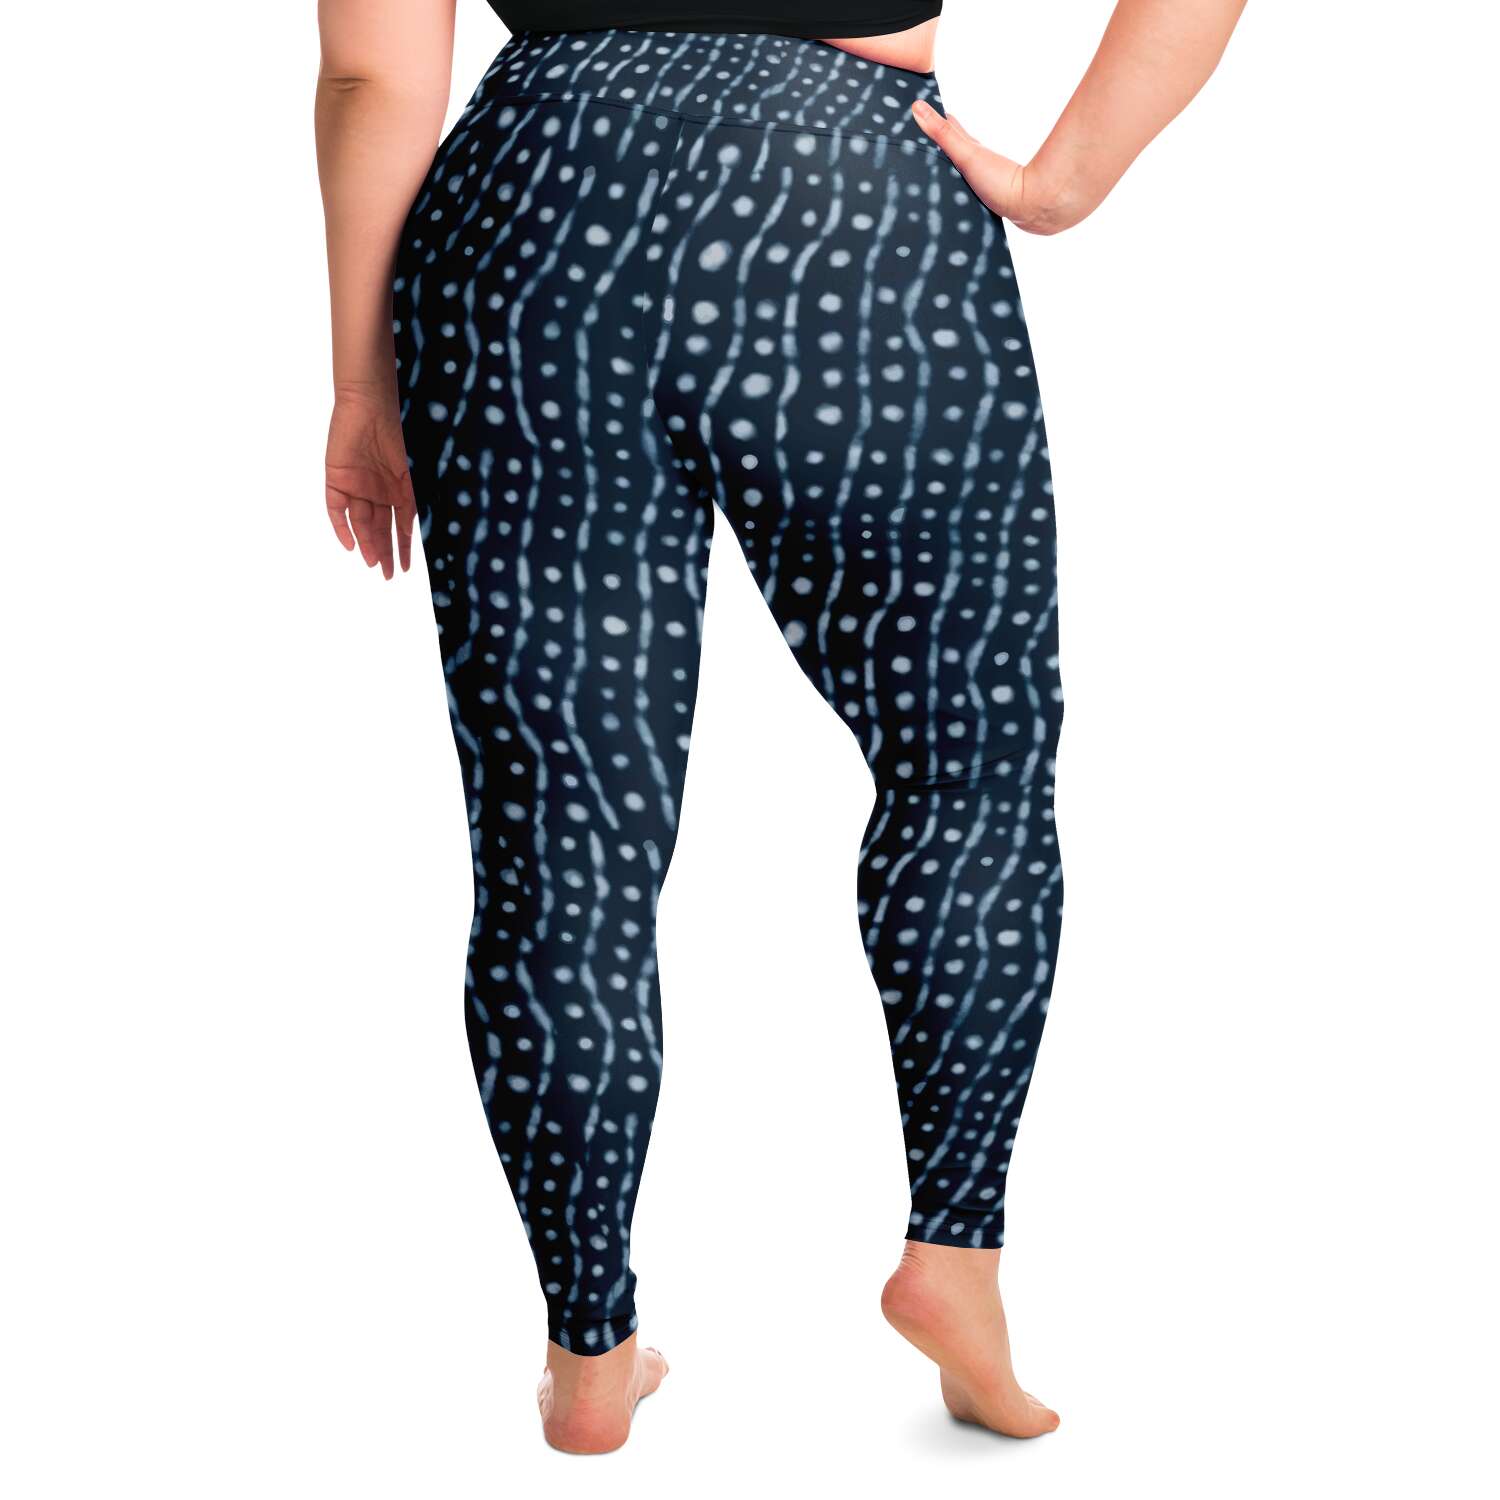 Back view of model wearing whale shark leggings / skins plus size for scuba diving and yoga